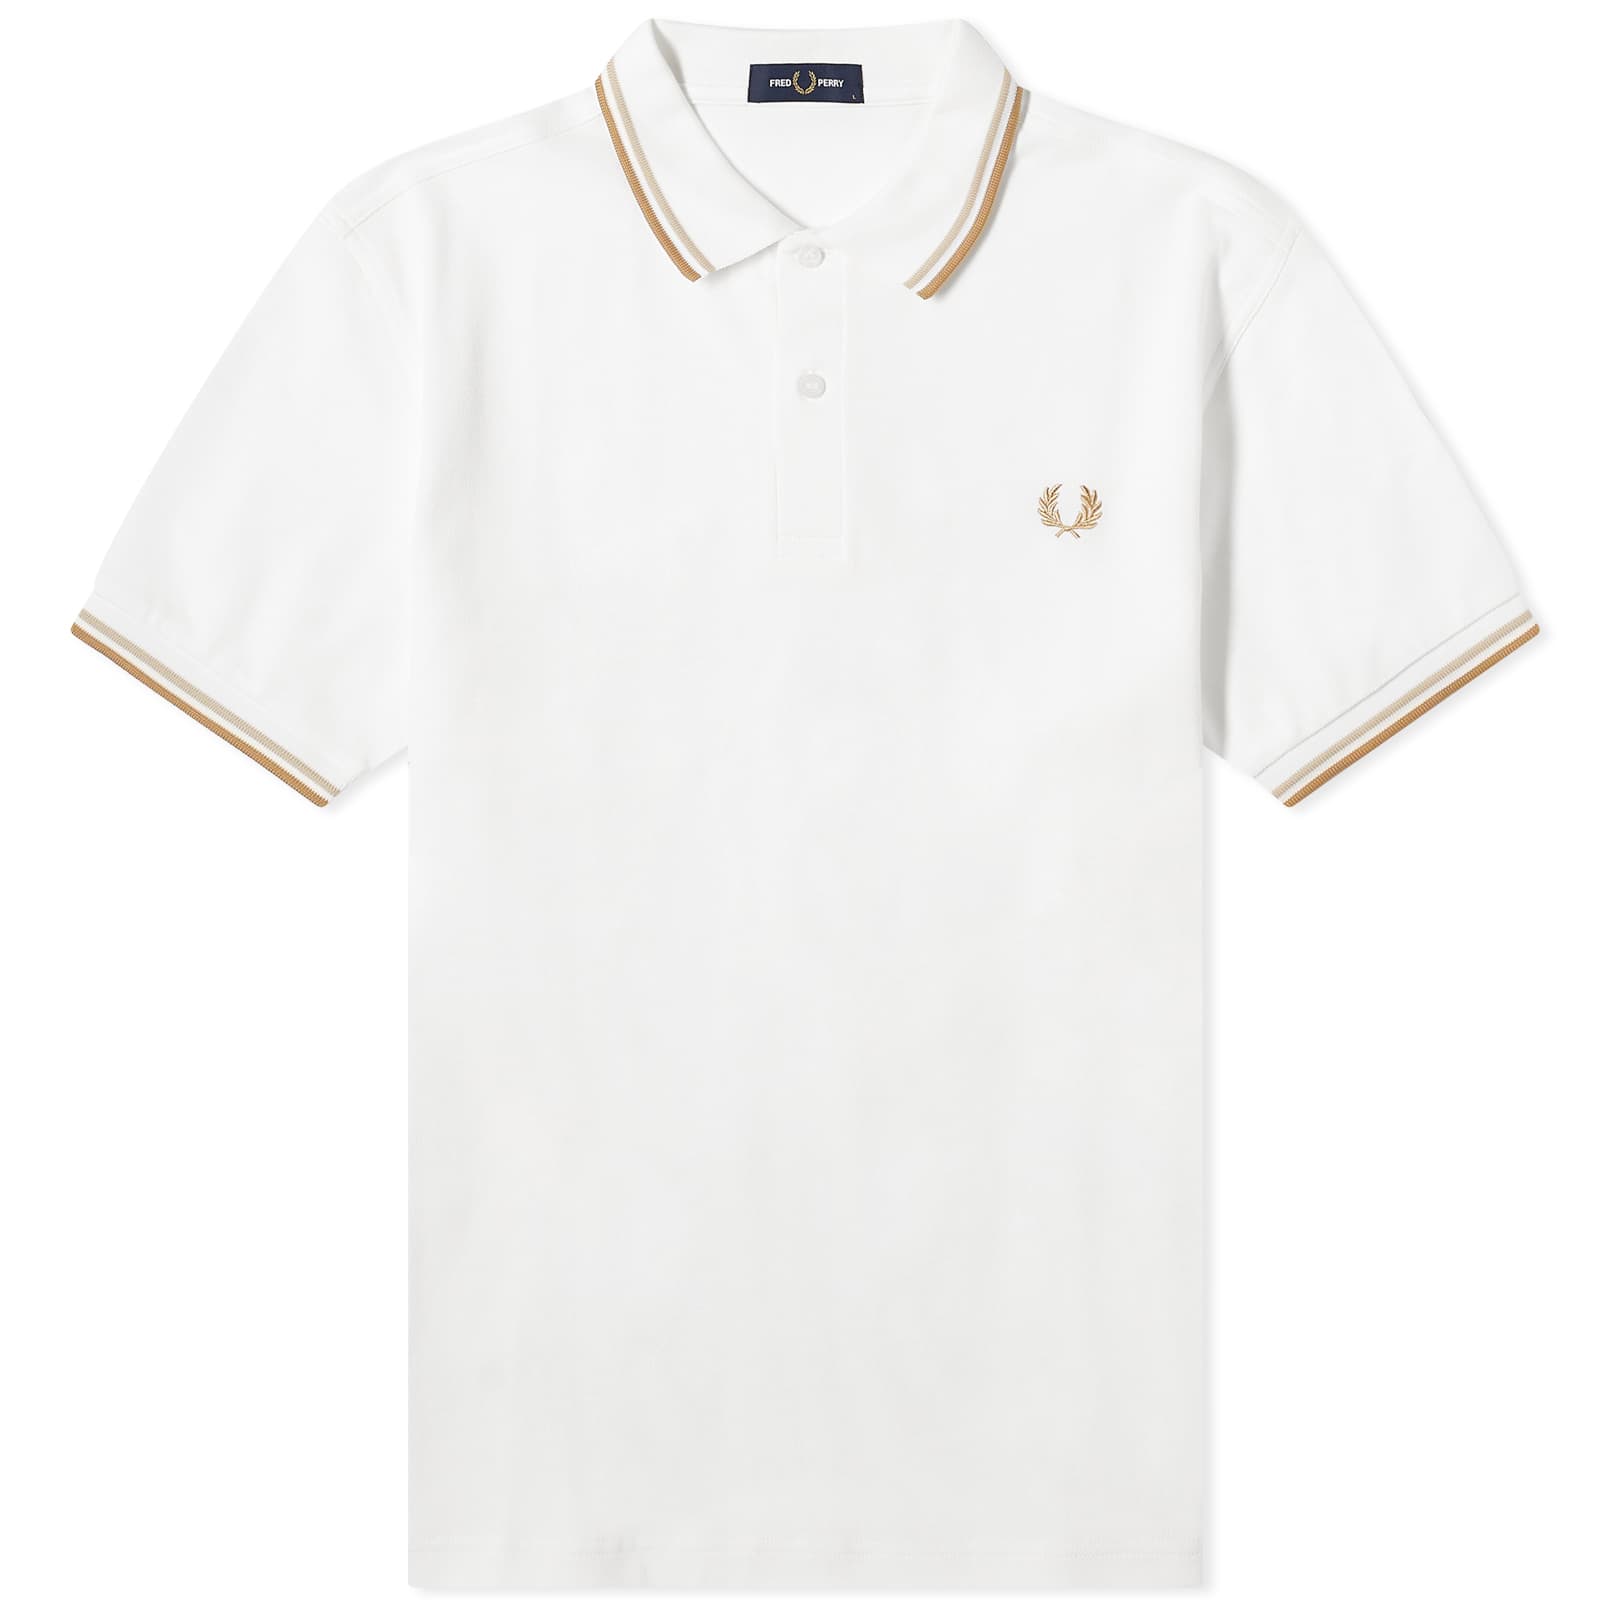 Поло Fred Perry Twin Tipped, цвет Snow, Oat & Stone футболка fred perry authentic twin tipped бордовый